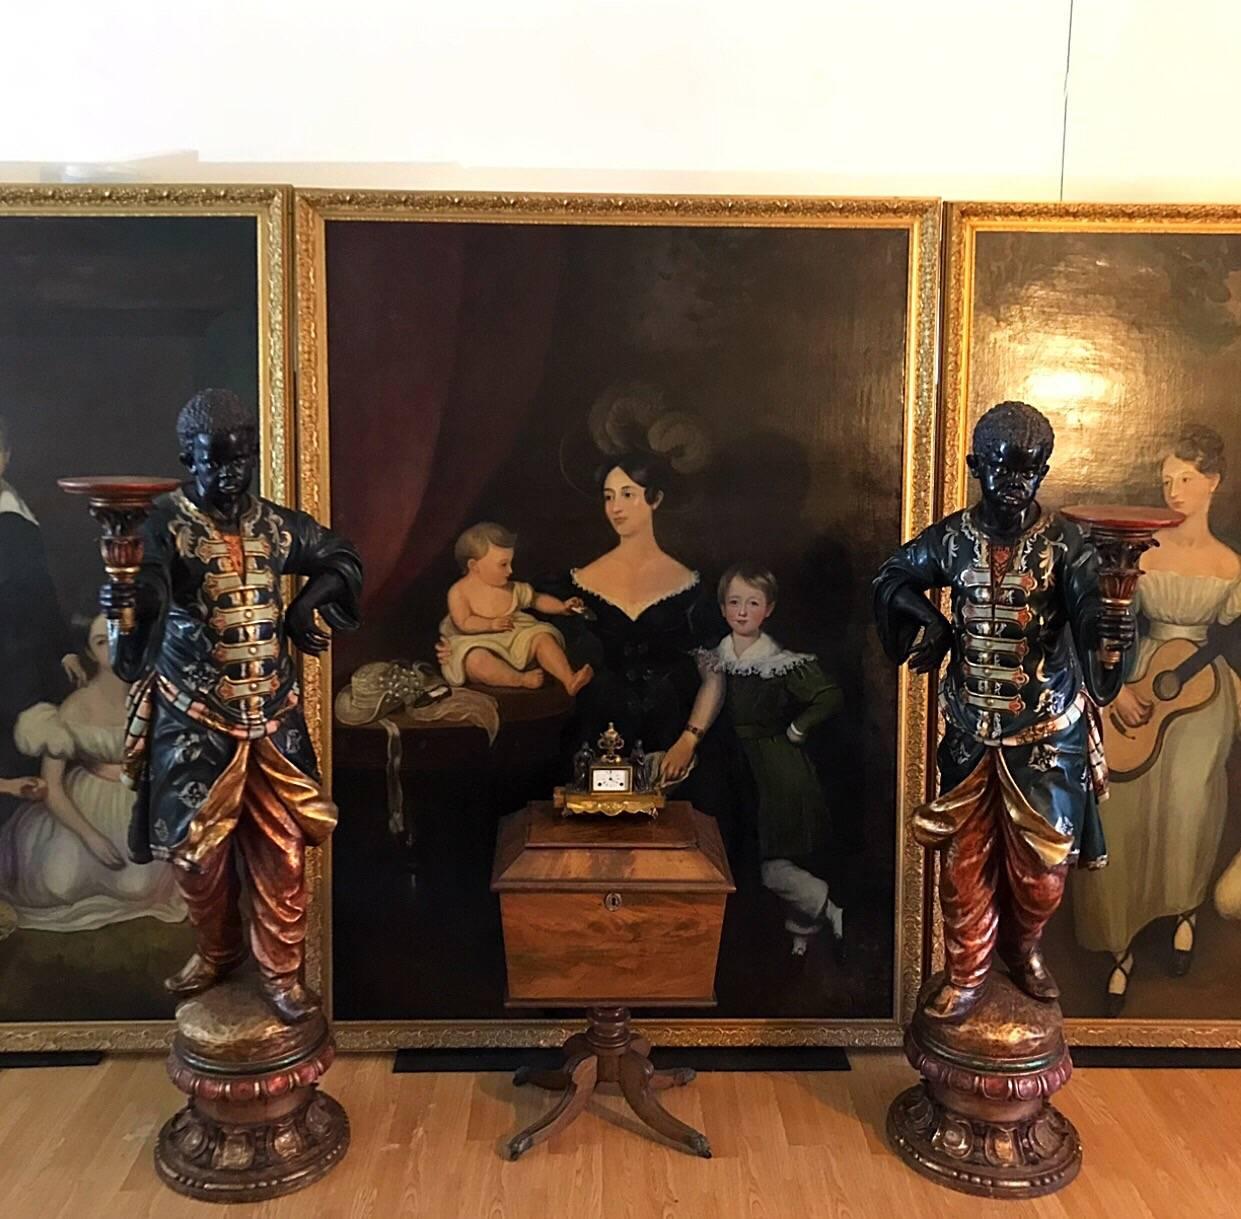 A Fine pair of 19th century Venetian Blackamoor torchere stands, carved wood with gesso, gilt and polychrome decoration, with glass eyes, each wearing elaborate costumes and holding a tazza in one hand, on raised circular socle plinths, truly